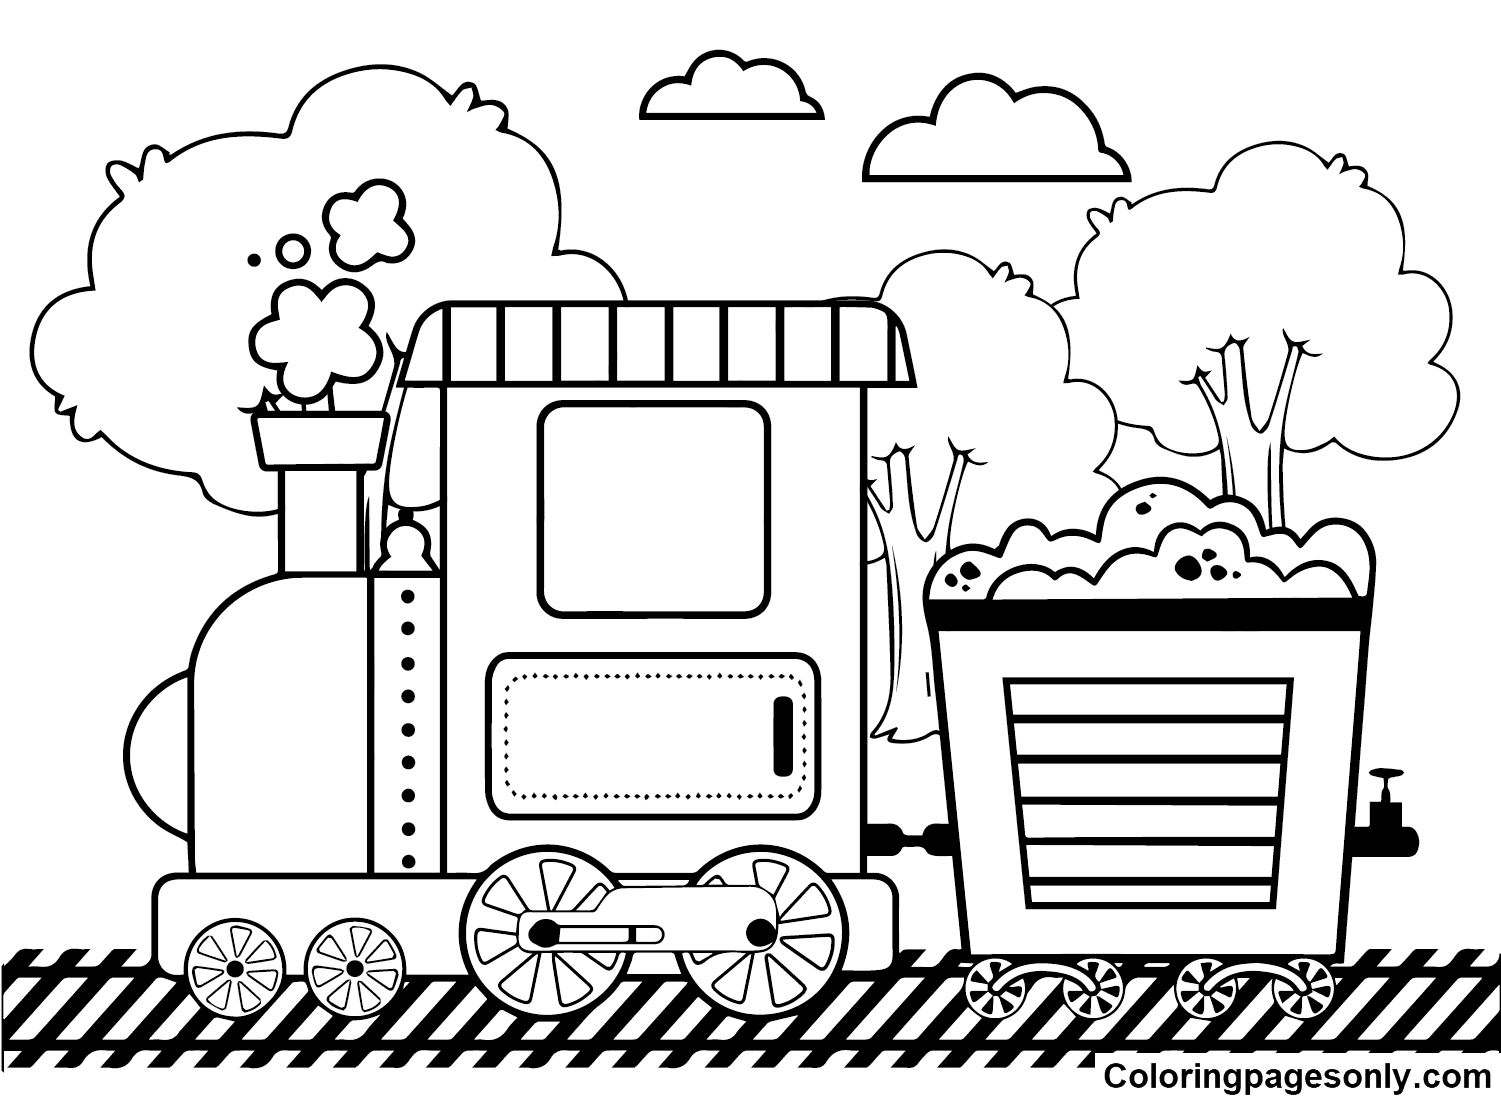 Train Free Coloring Pages